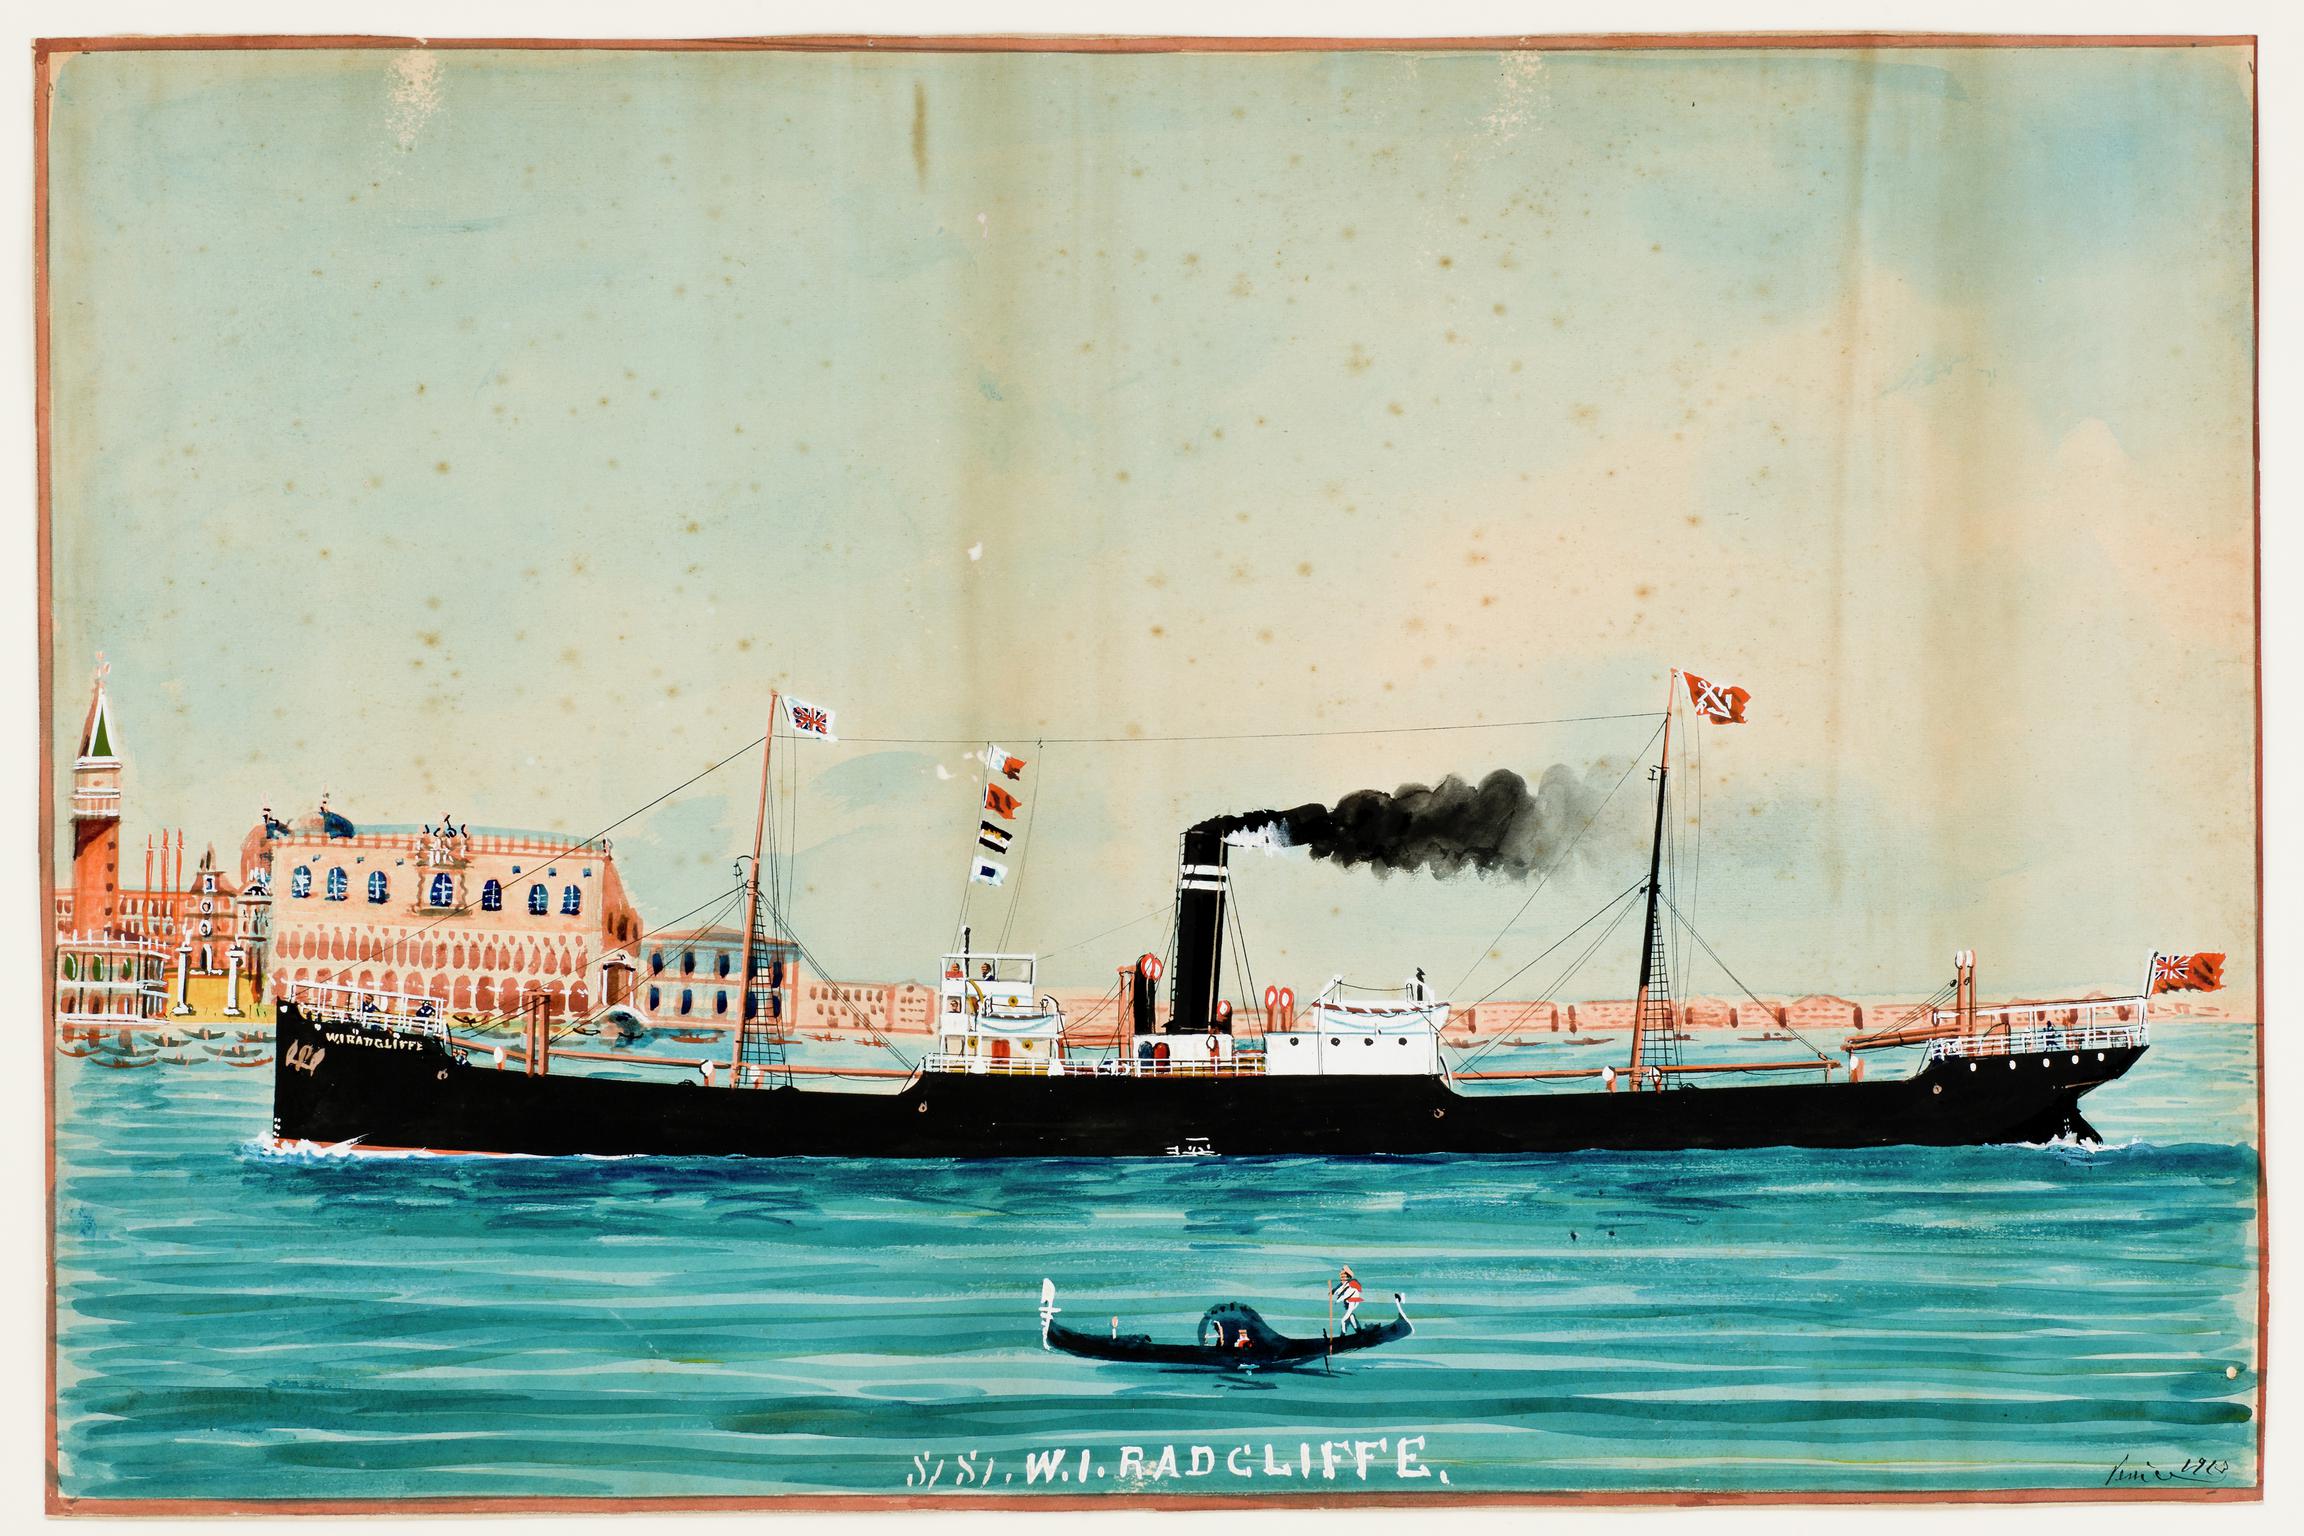 S.S. W.I. RADCLIFFE (painting)